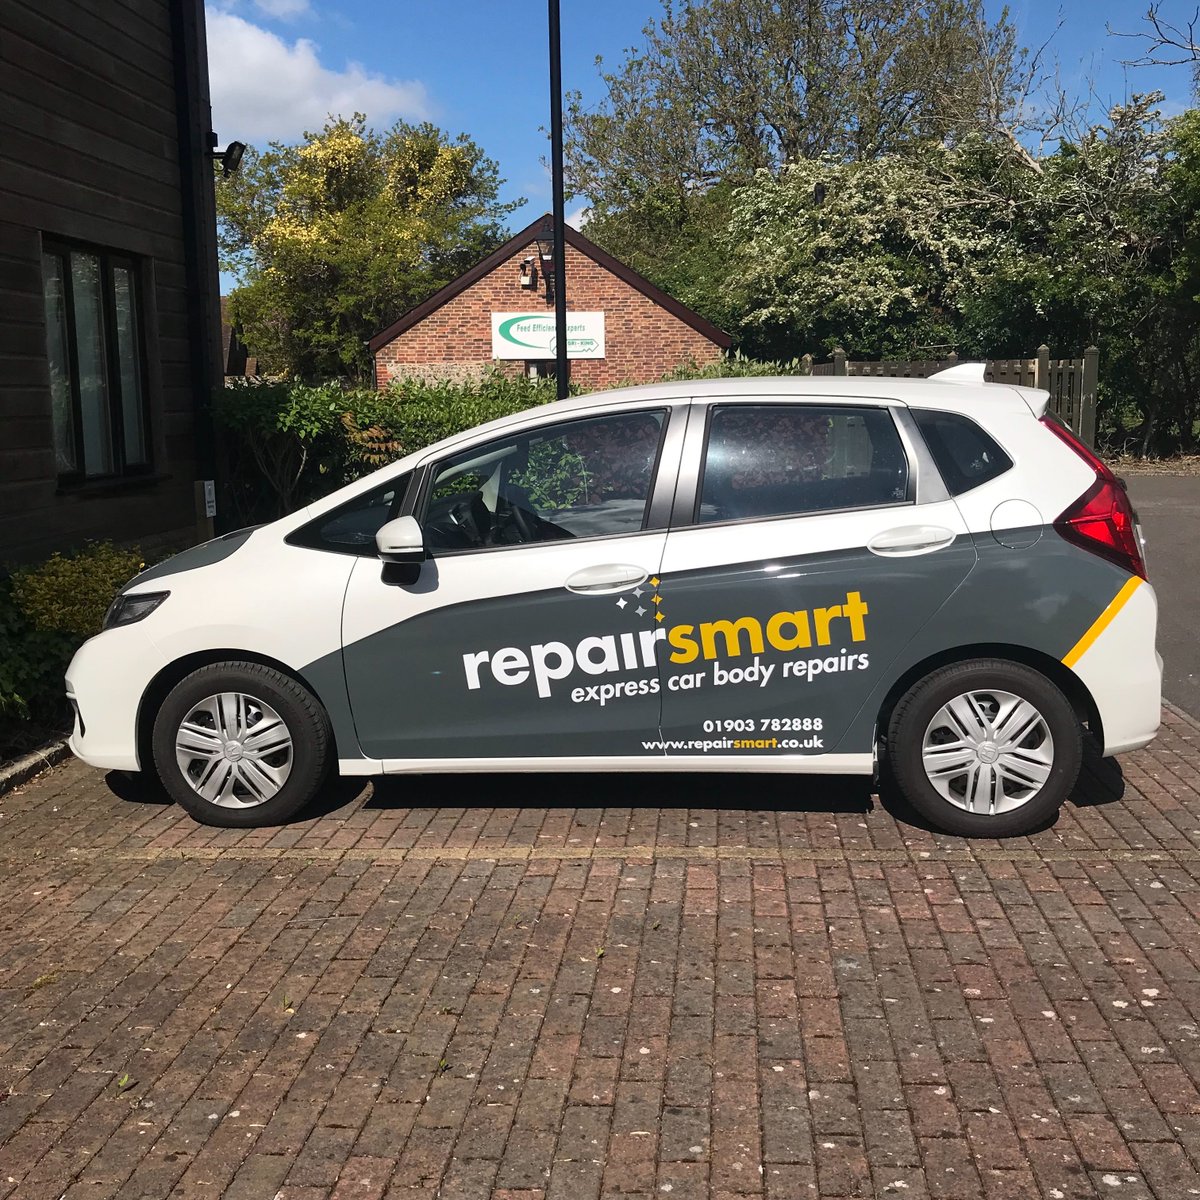 Not only will we repair your car to pristine condition but we make sure that you are still able to go about your normal day as well with a courtesy car available to you. #repairsmart #carbodyrepair #dentrepair #alloywheelrepair